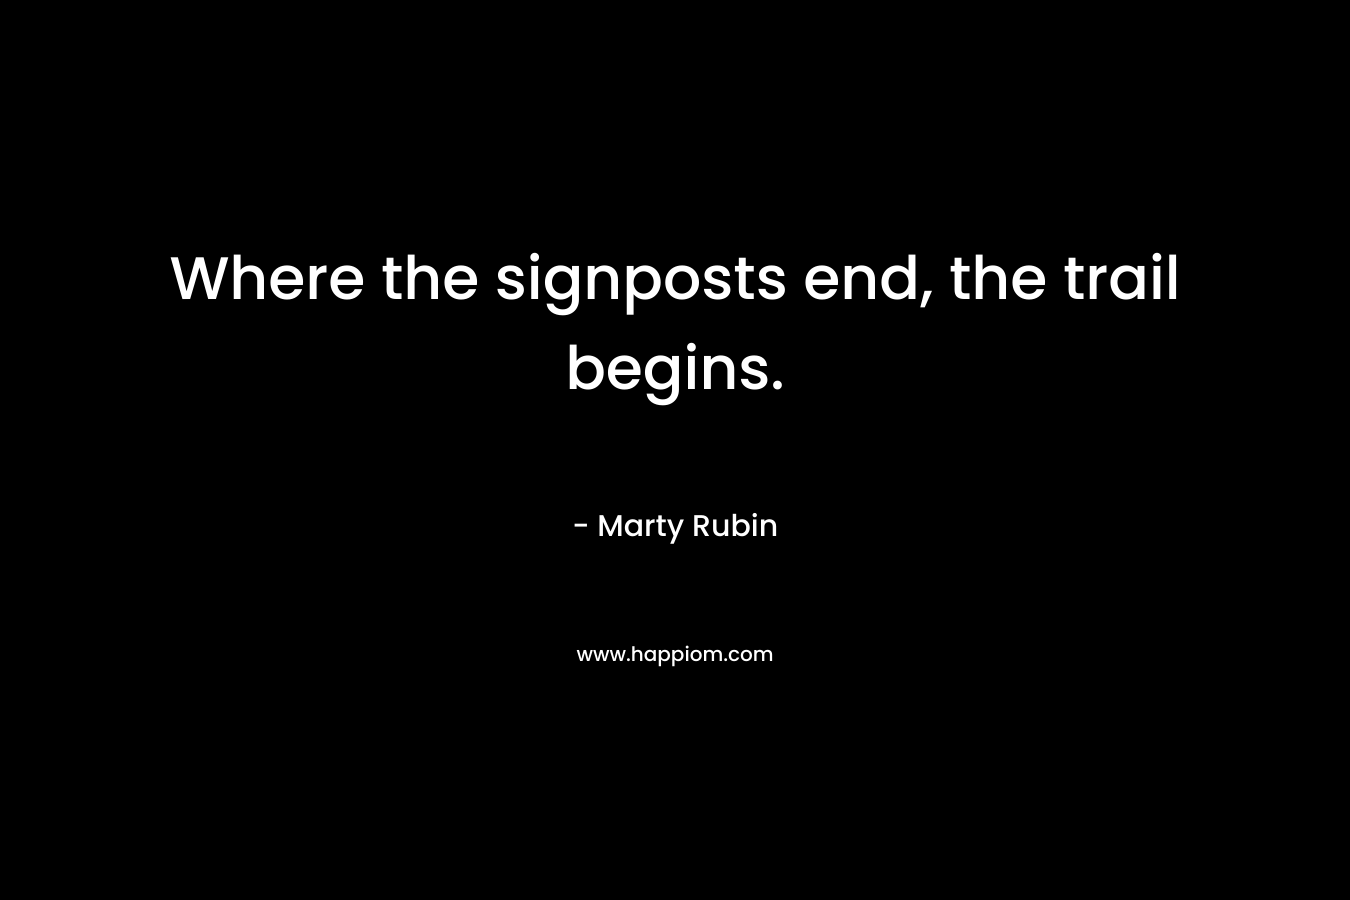 Where the signposts end, the trail begins. – Marty Rubin